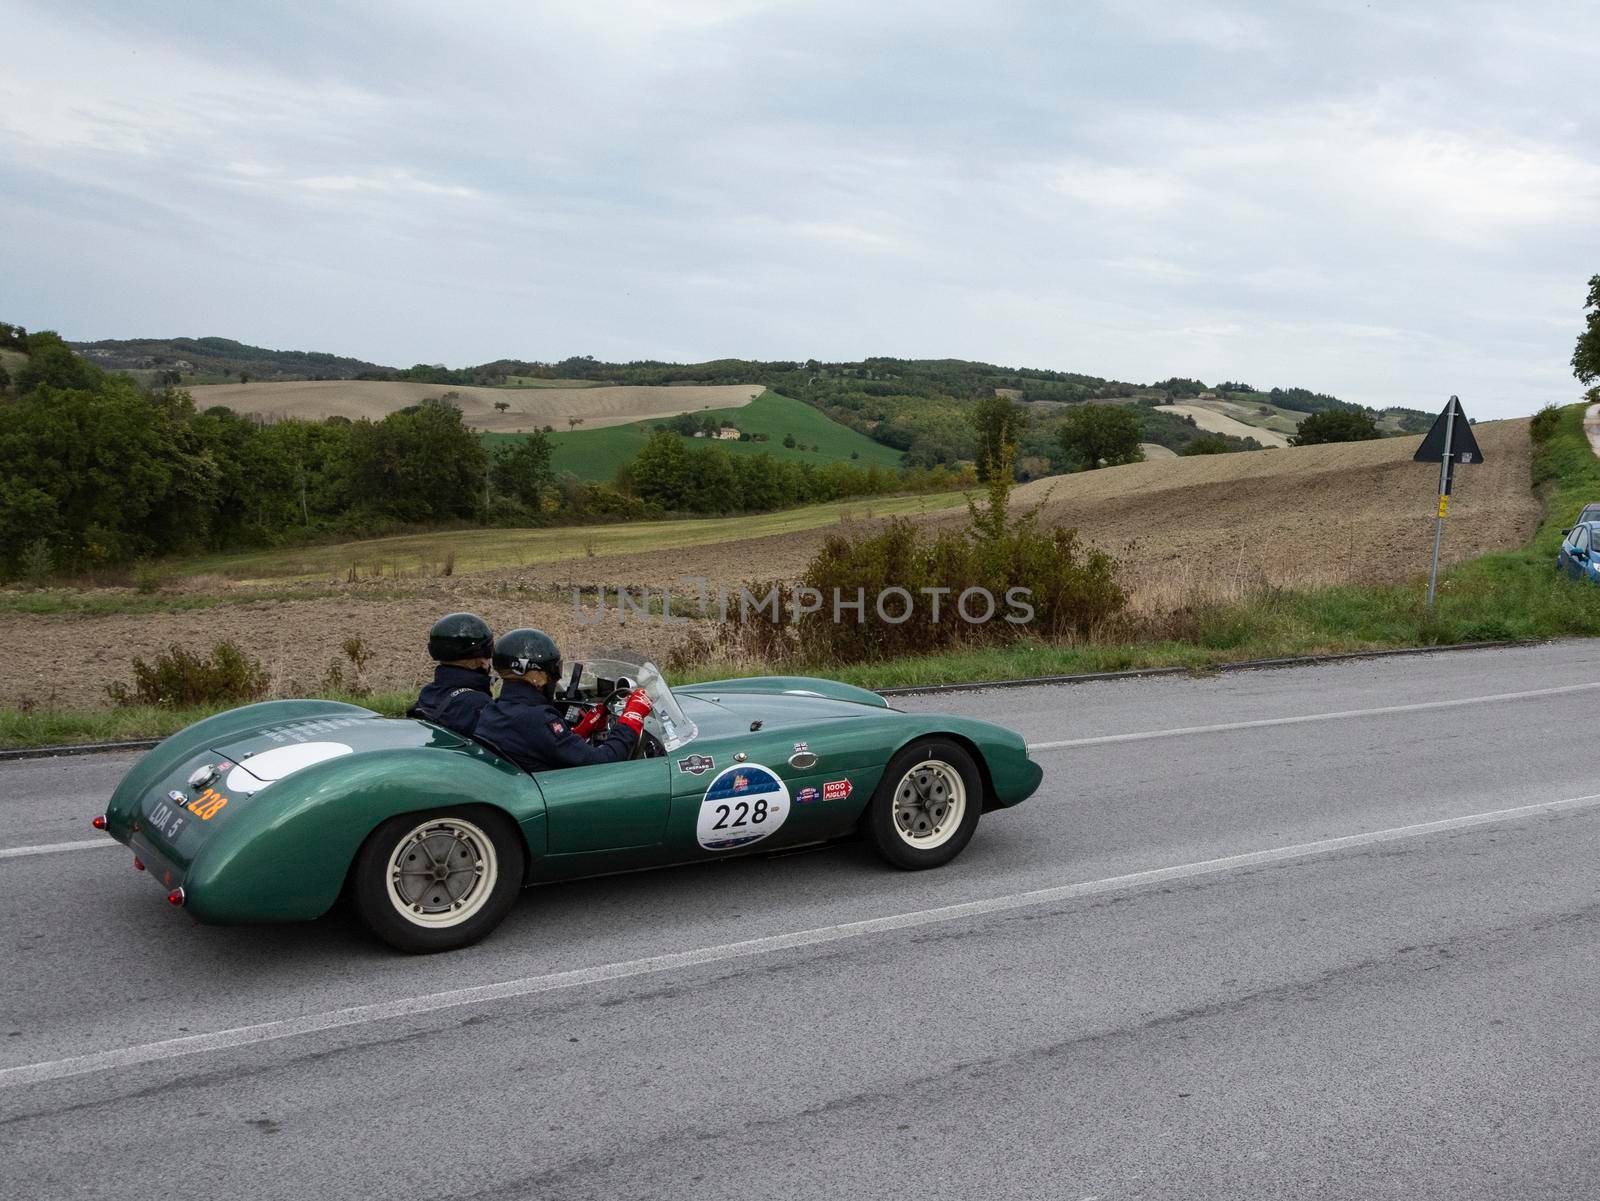 CAGLI , ITALY - OTT 24 - 2020 : KIEFT TURNER 1953 on an old racing car in rally Mille Miglia 2020 the famous italian historical race (1927-1957)